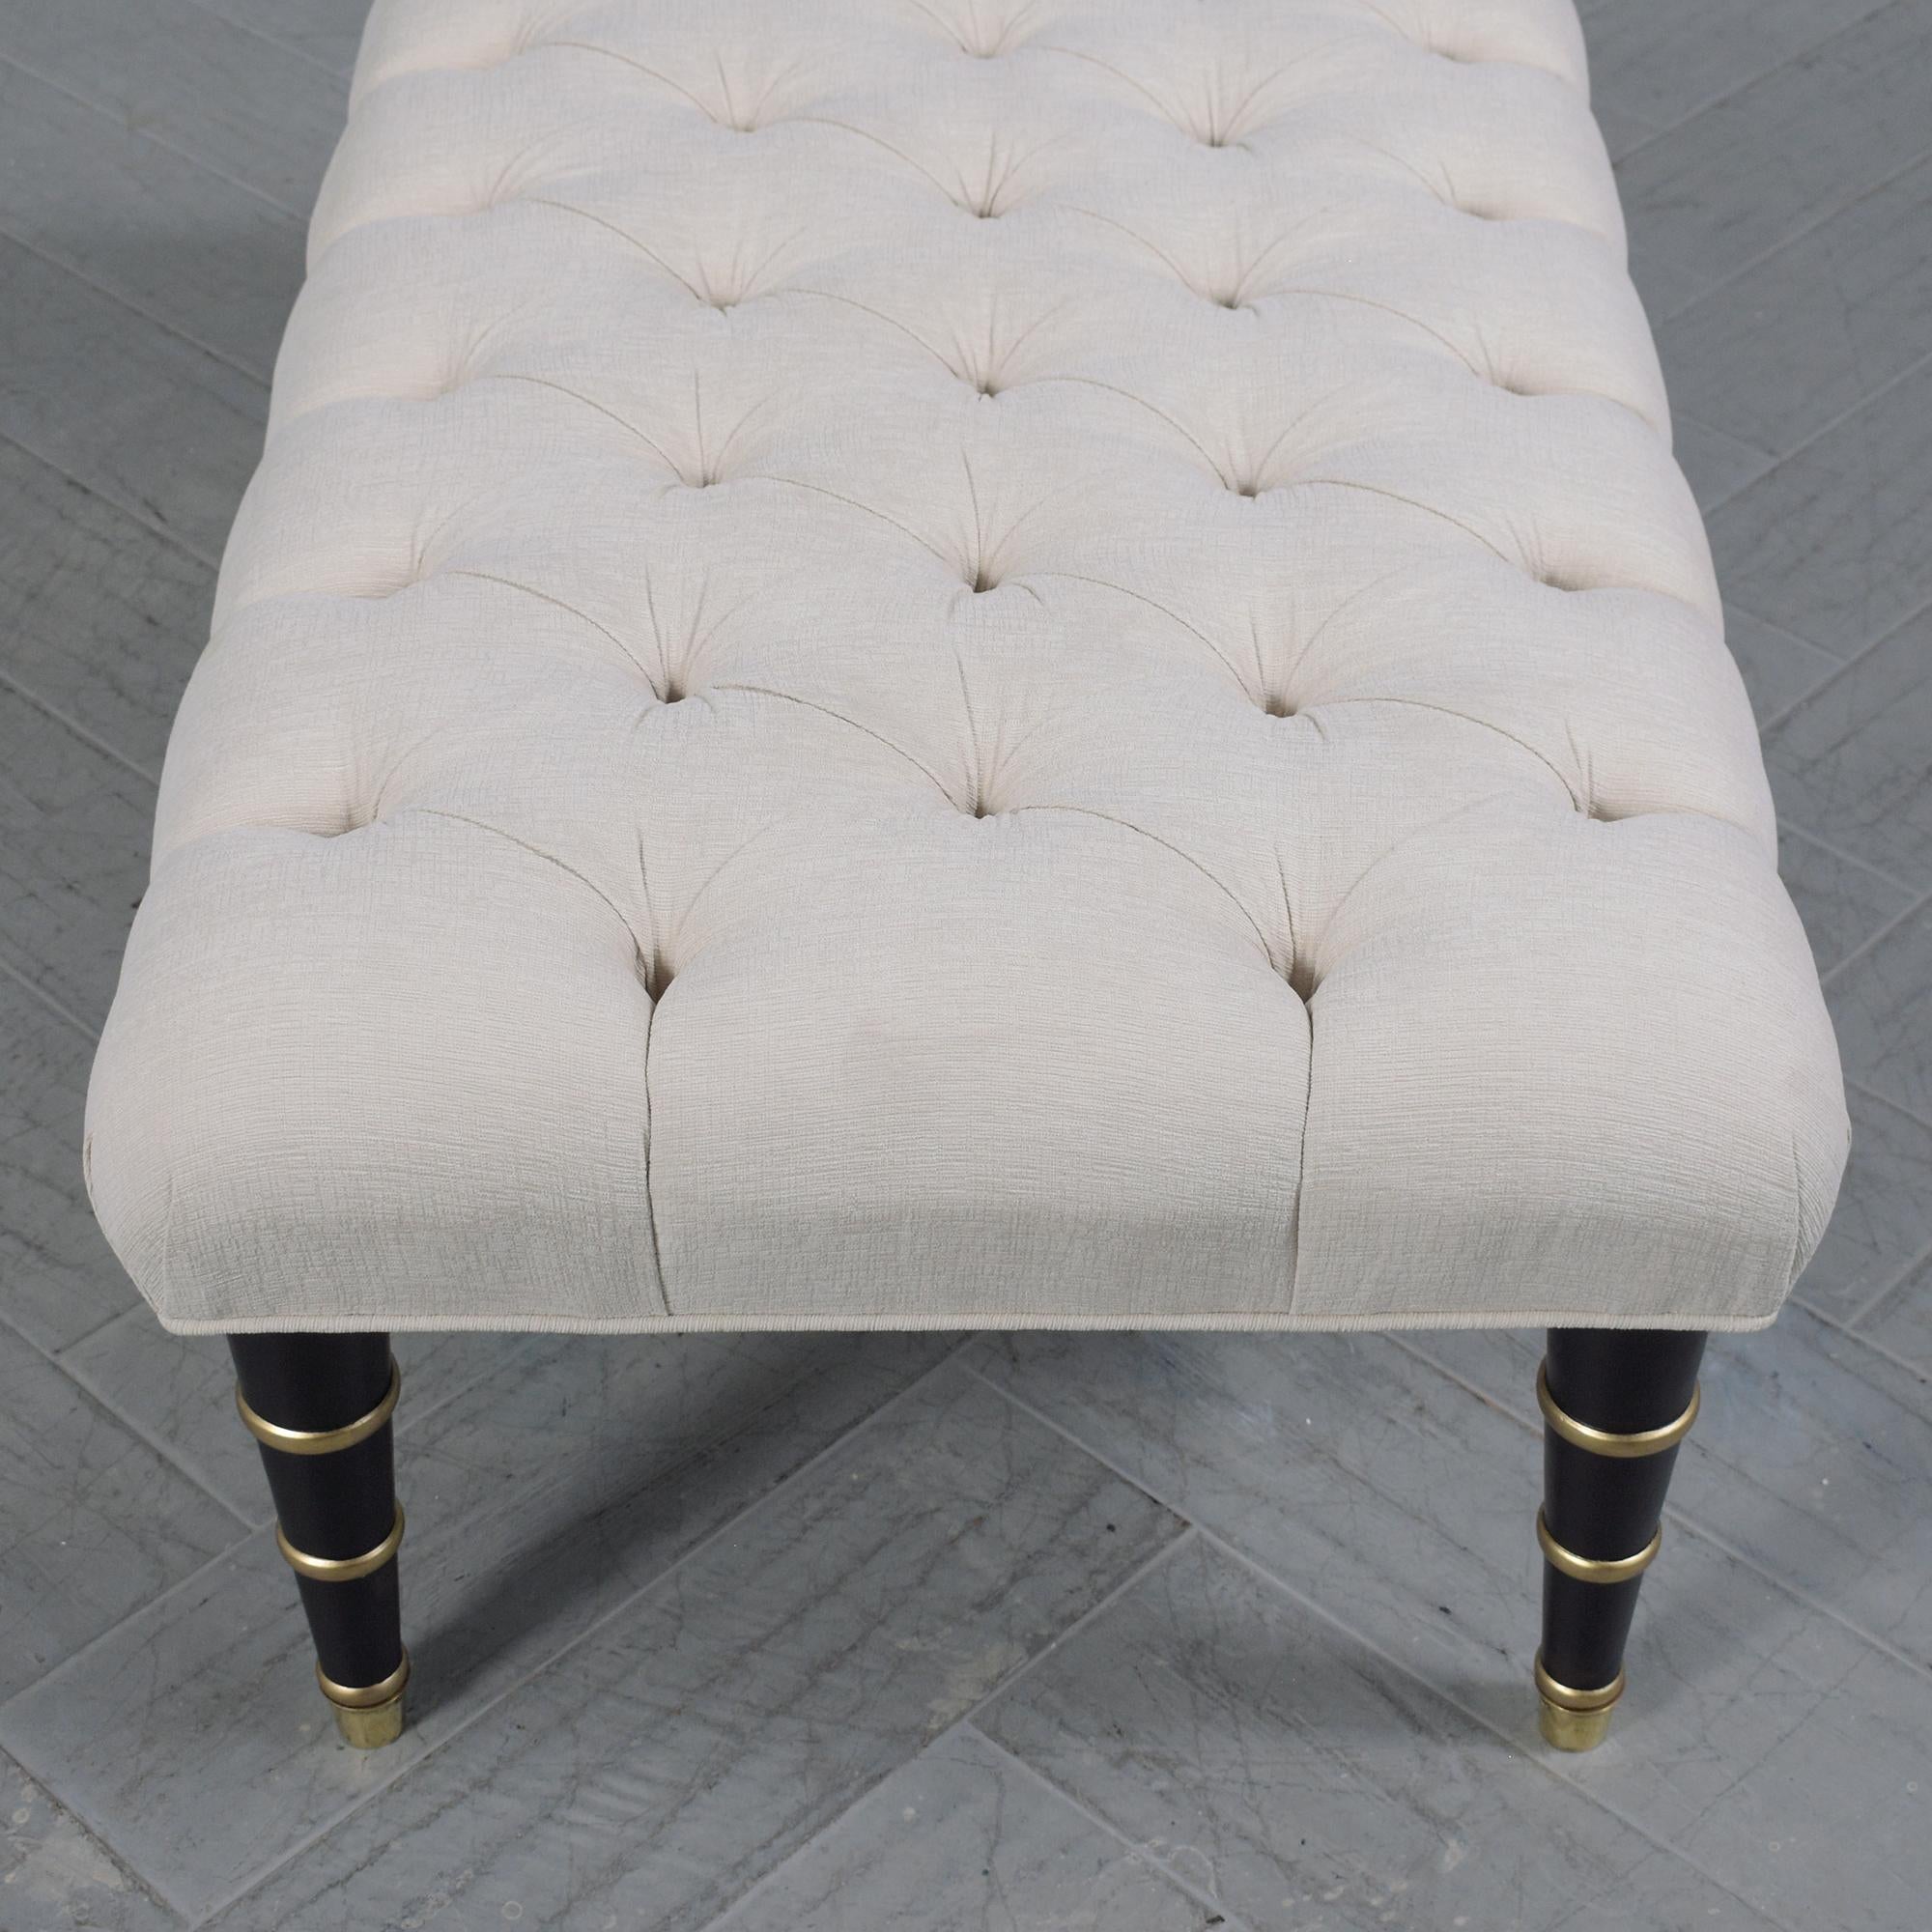 Restored Regency-Style Mahogany Bench with Tufted Chenille Upholstery For Sale 1